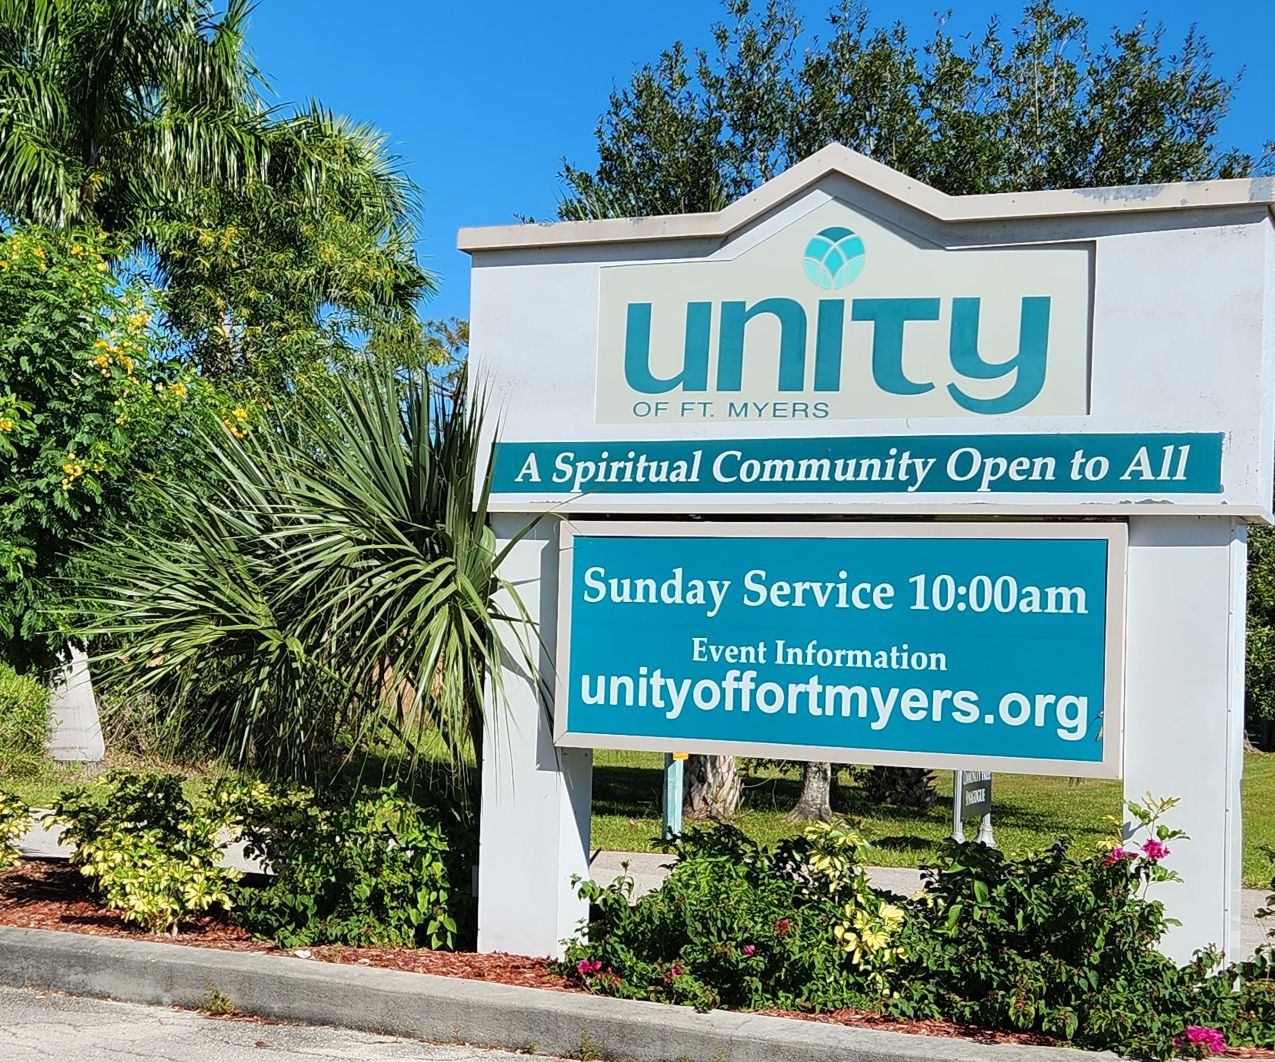 welcome to unity of fort myers